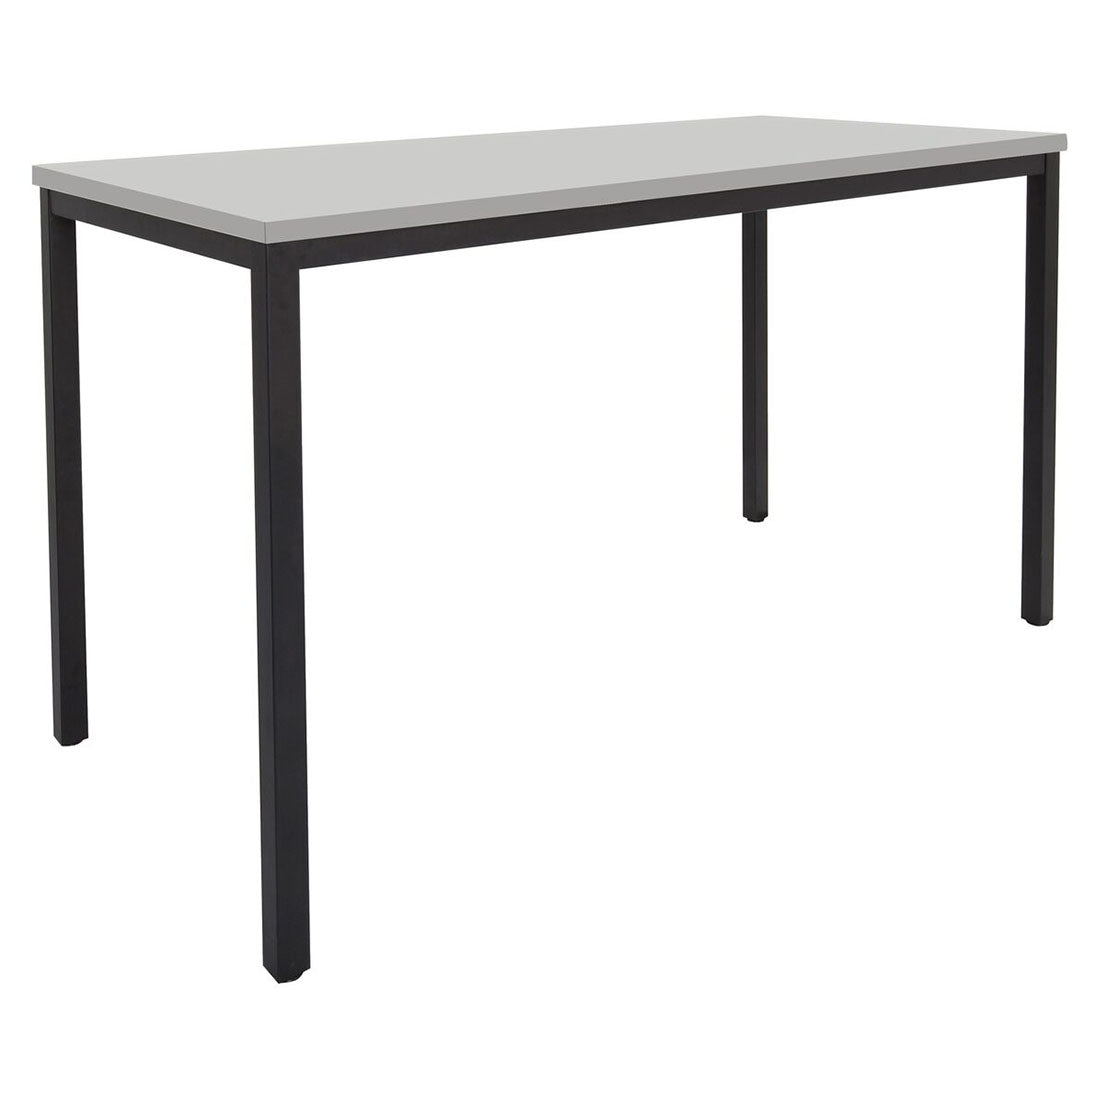 Steel Frame Drafting Height Table - switchoffice.com.au